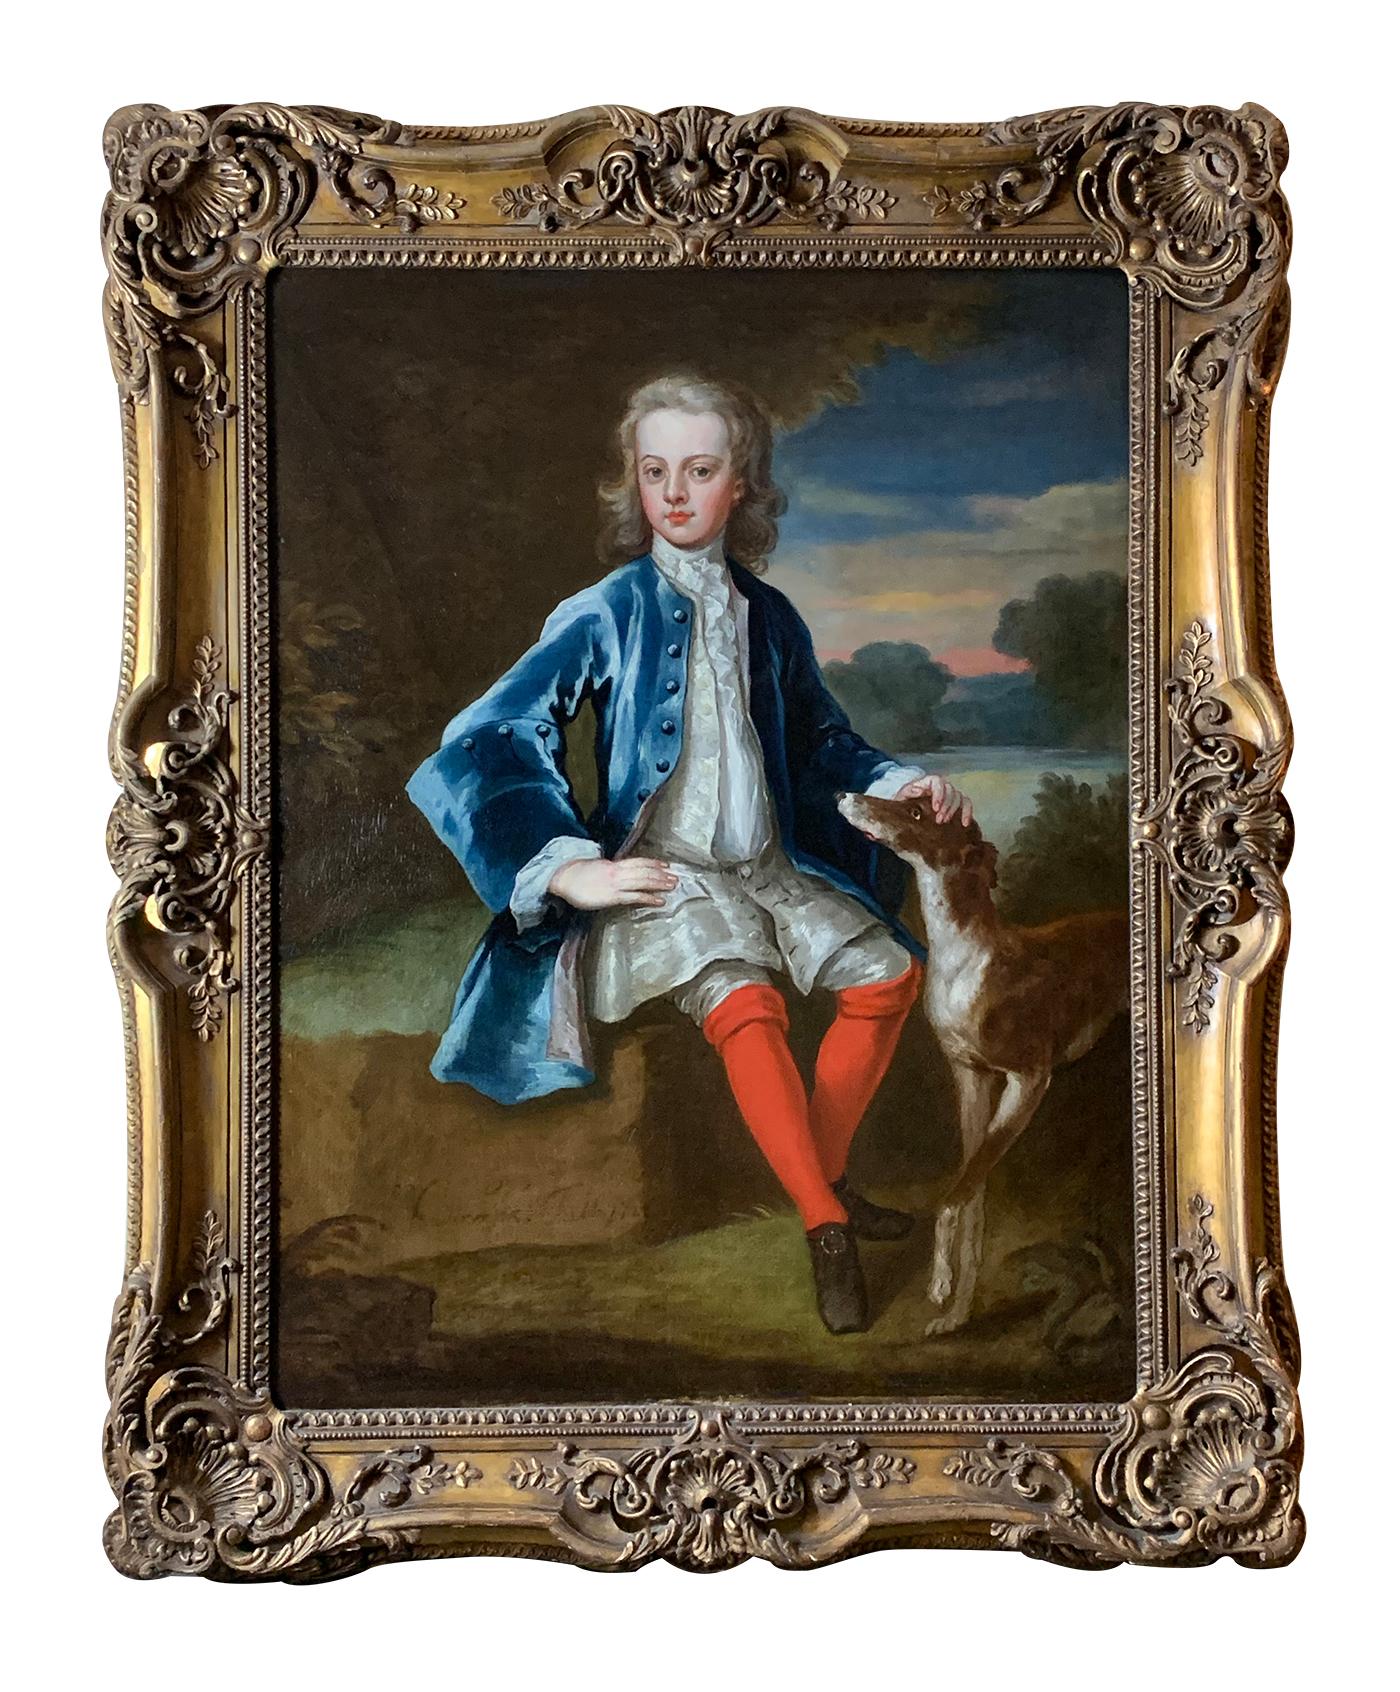 John Vanderbank Interior Painting - 18th Century English Portrait of a Gentleman in a Blue Coat with his Dog